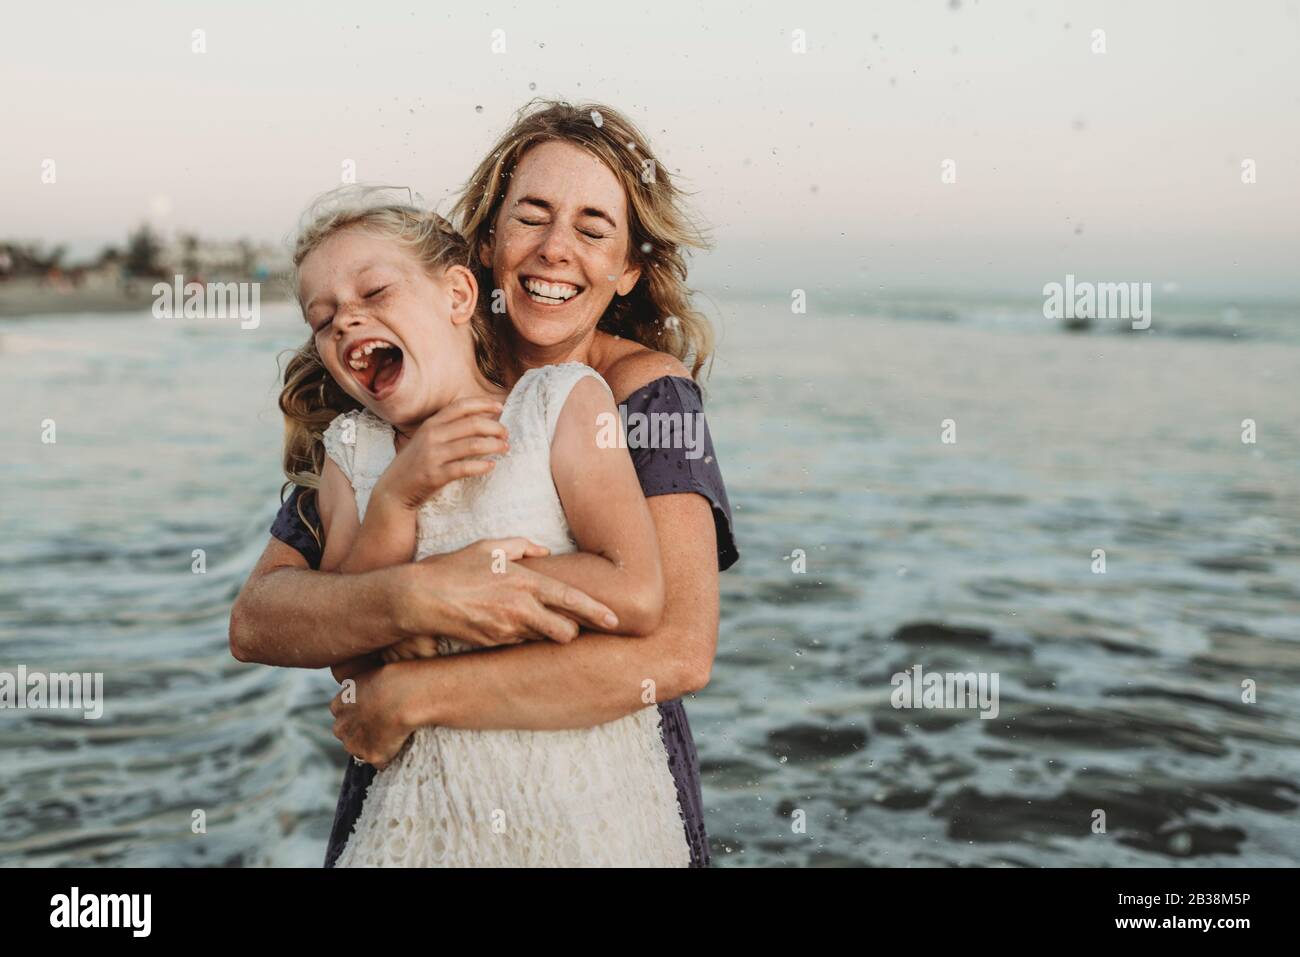 Mother embracing young girl with freckles in ocean Stock Photo